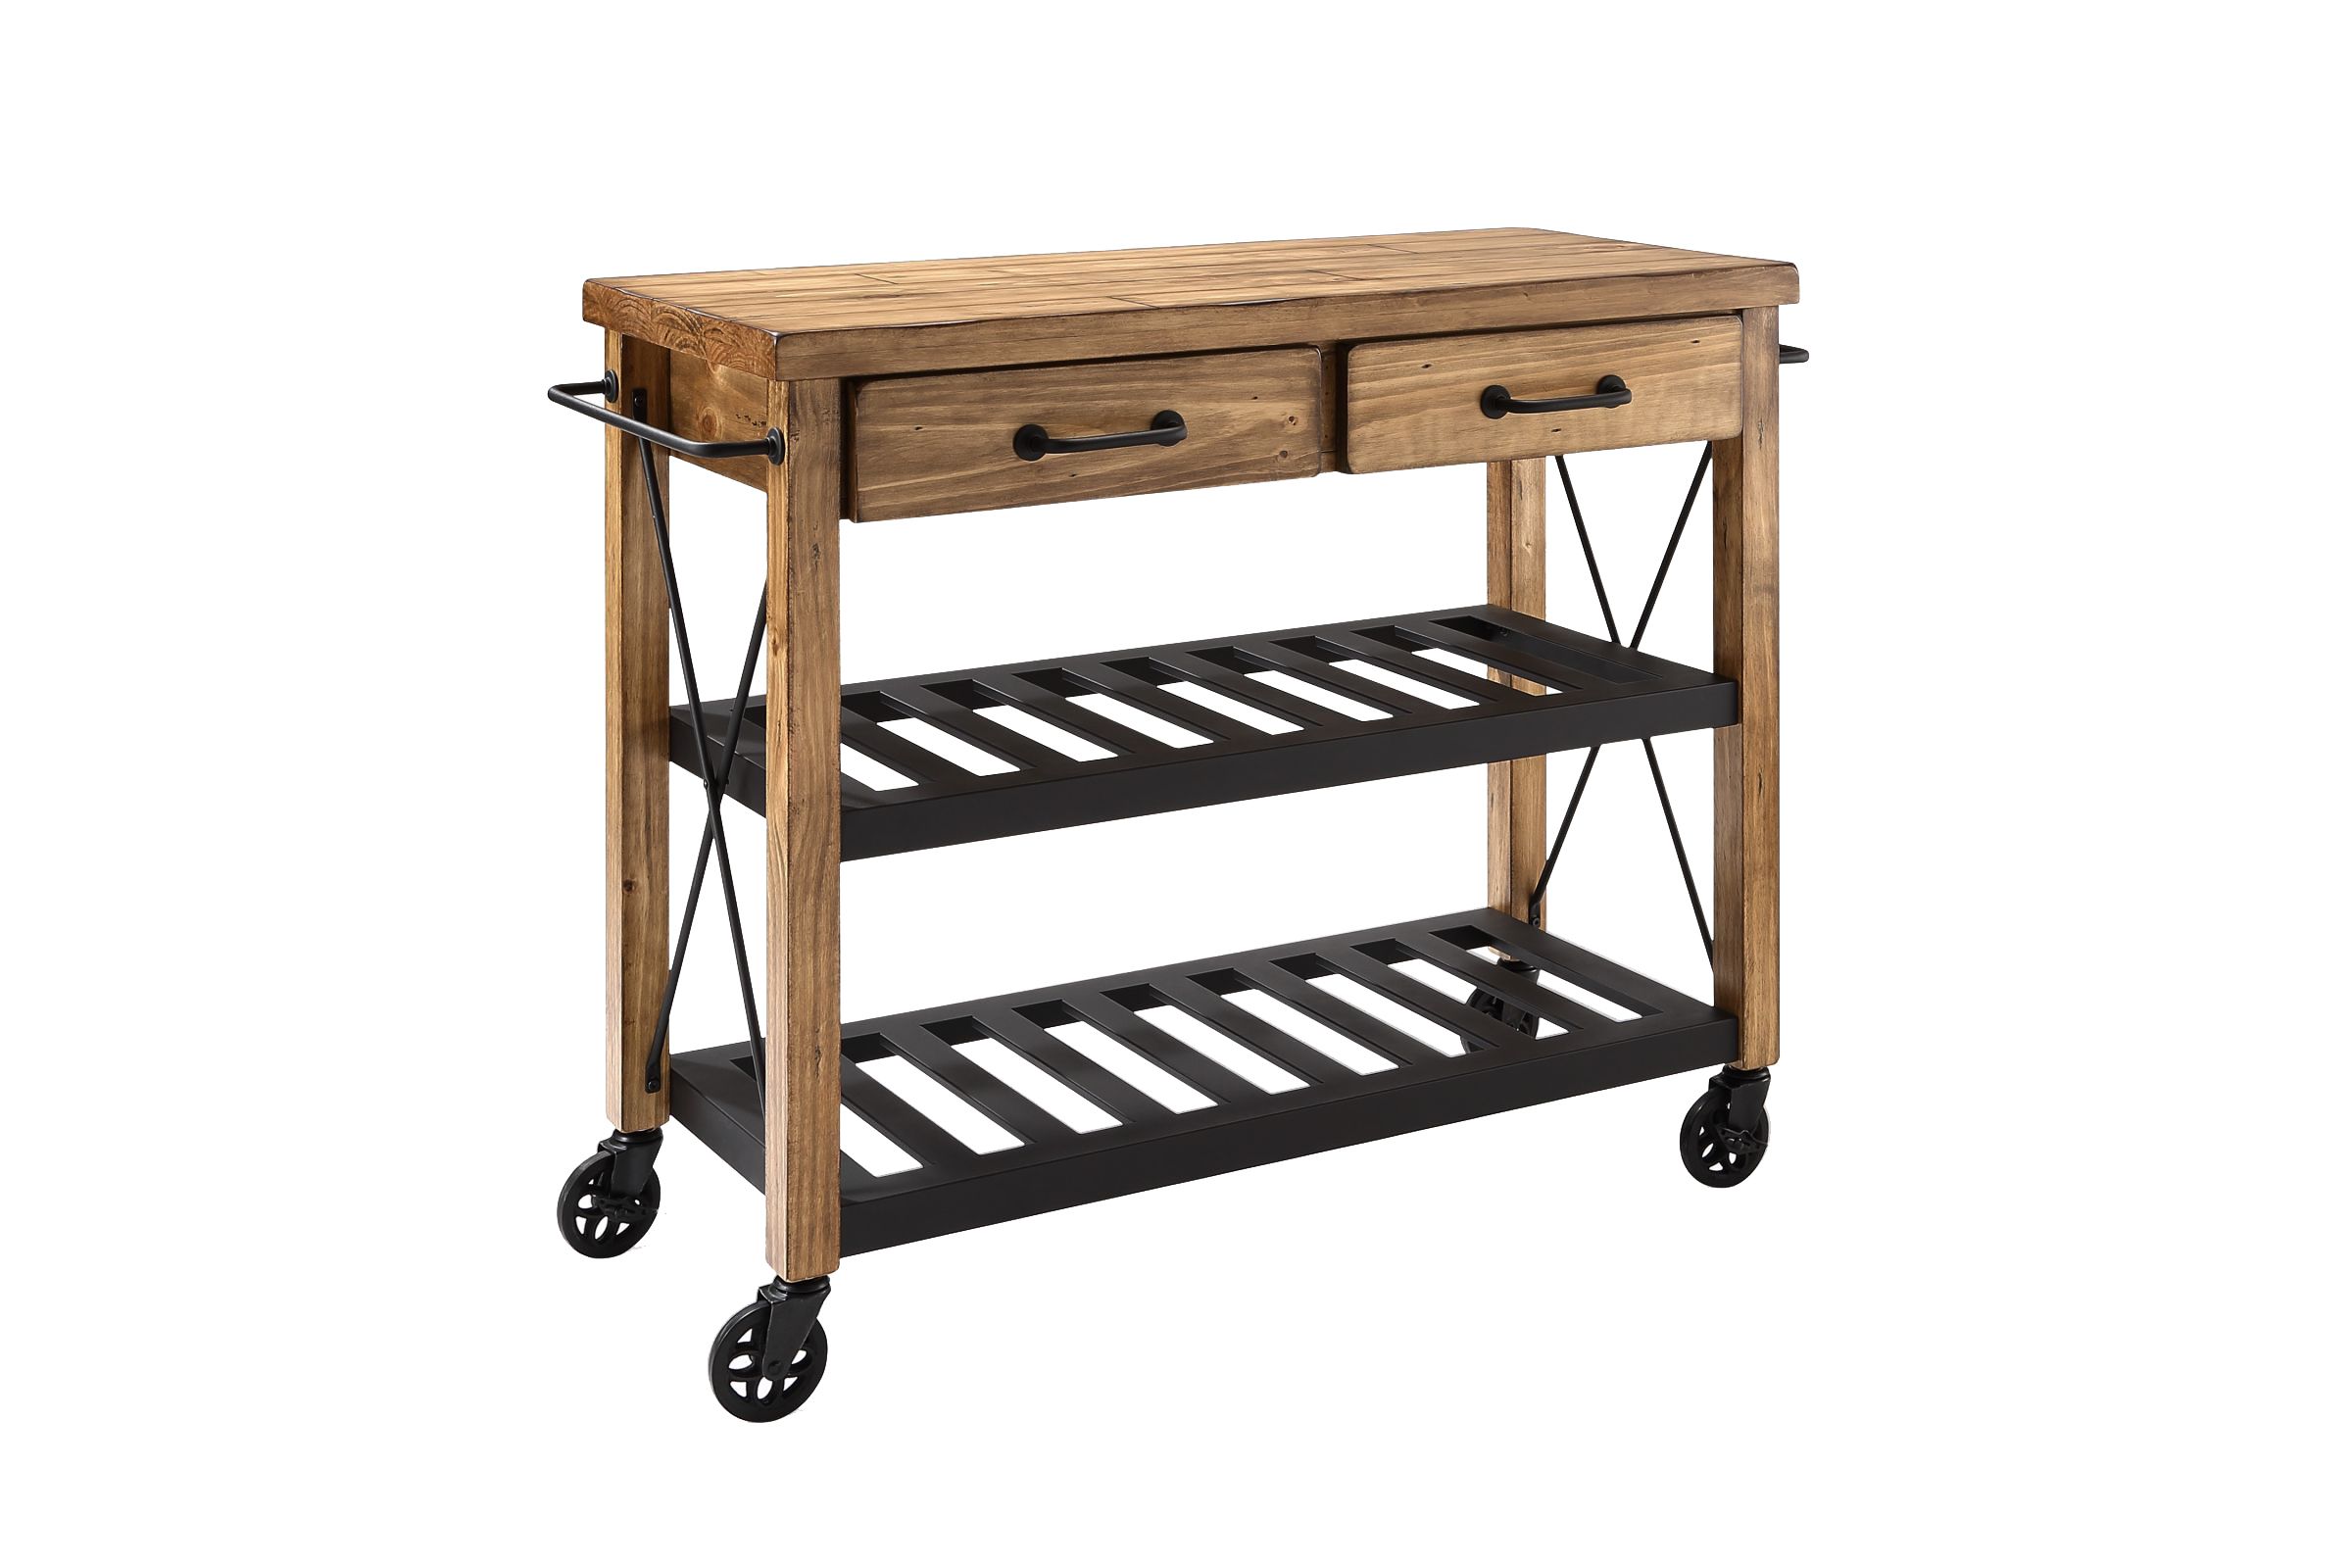 Roots Rack Industrial Kitchen Cart in Natural